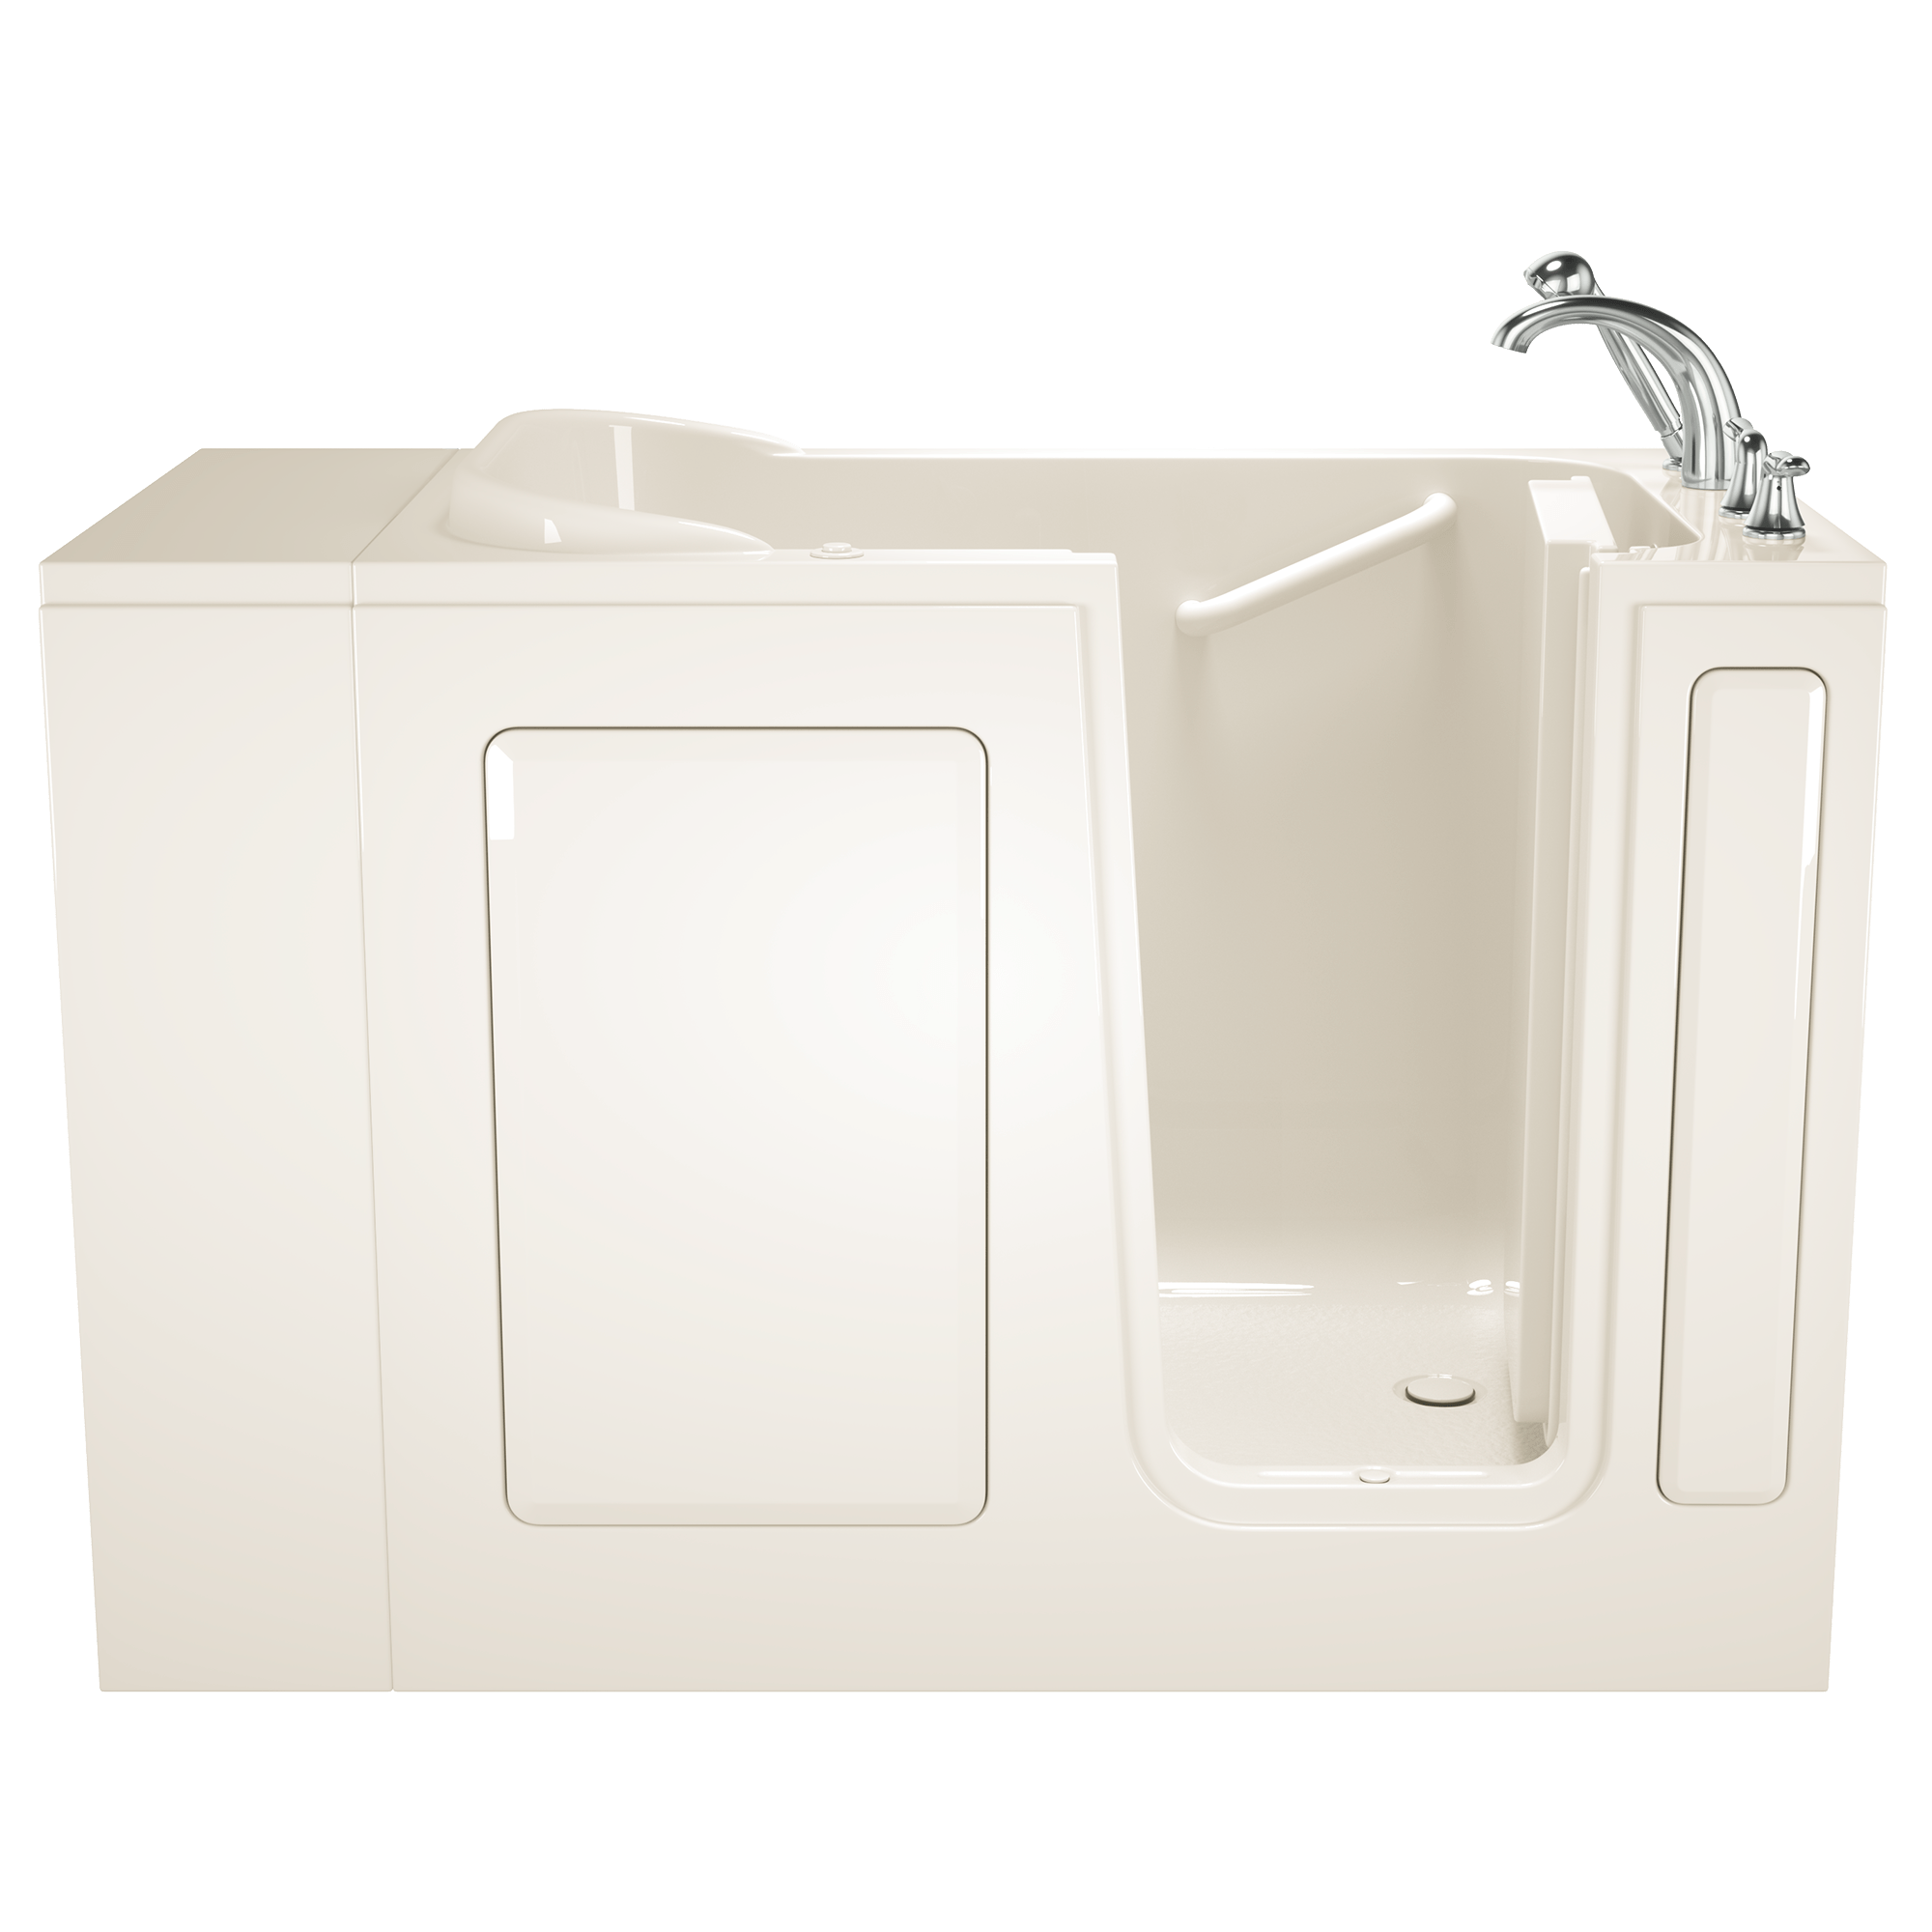 Gelcoat Entry Series 48 x 28 Inch Walk In Tub With Whirlpool System - Right Hand Drain With Faucet ST BISCUIT